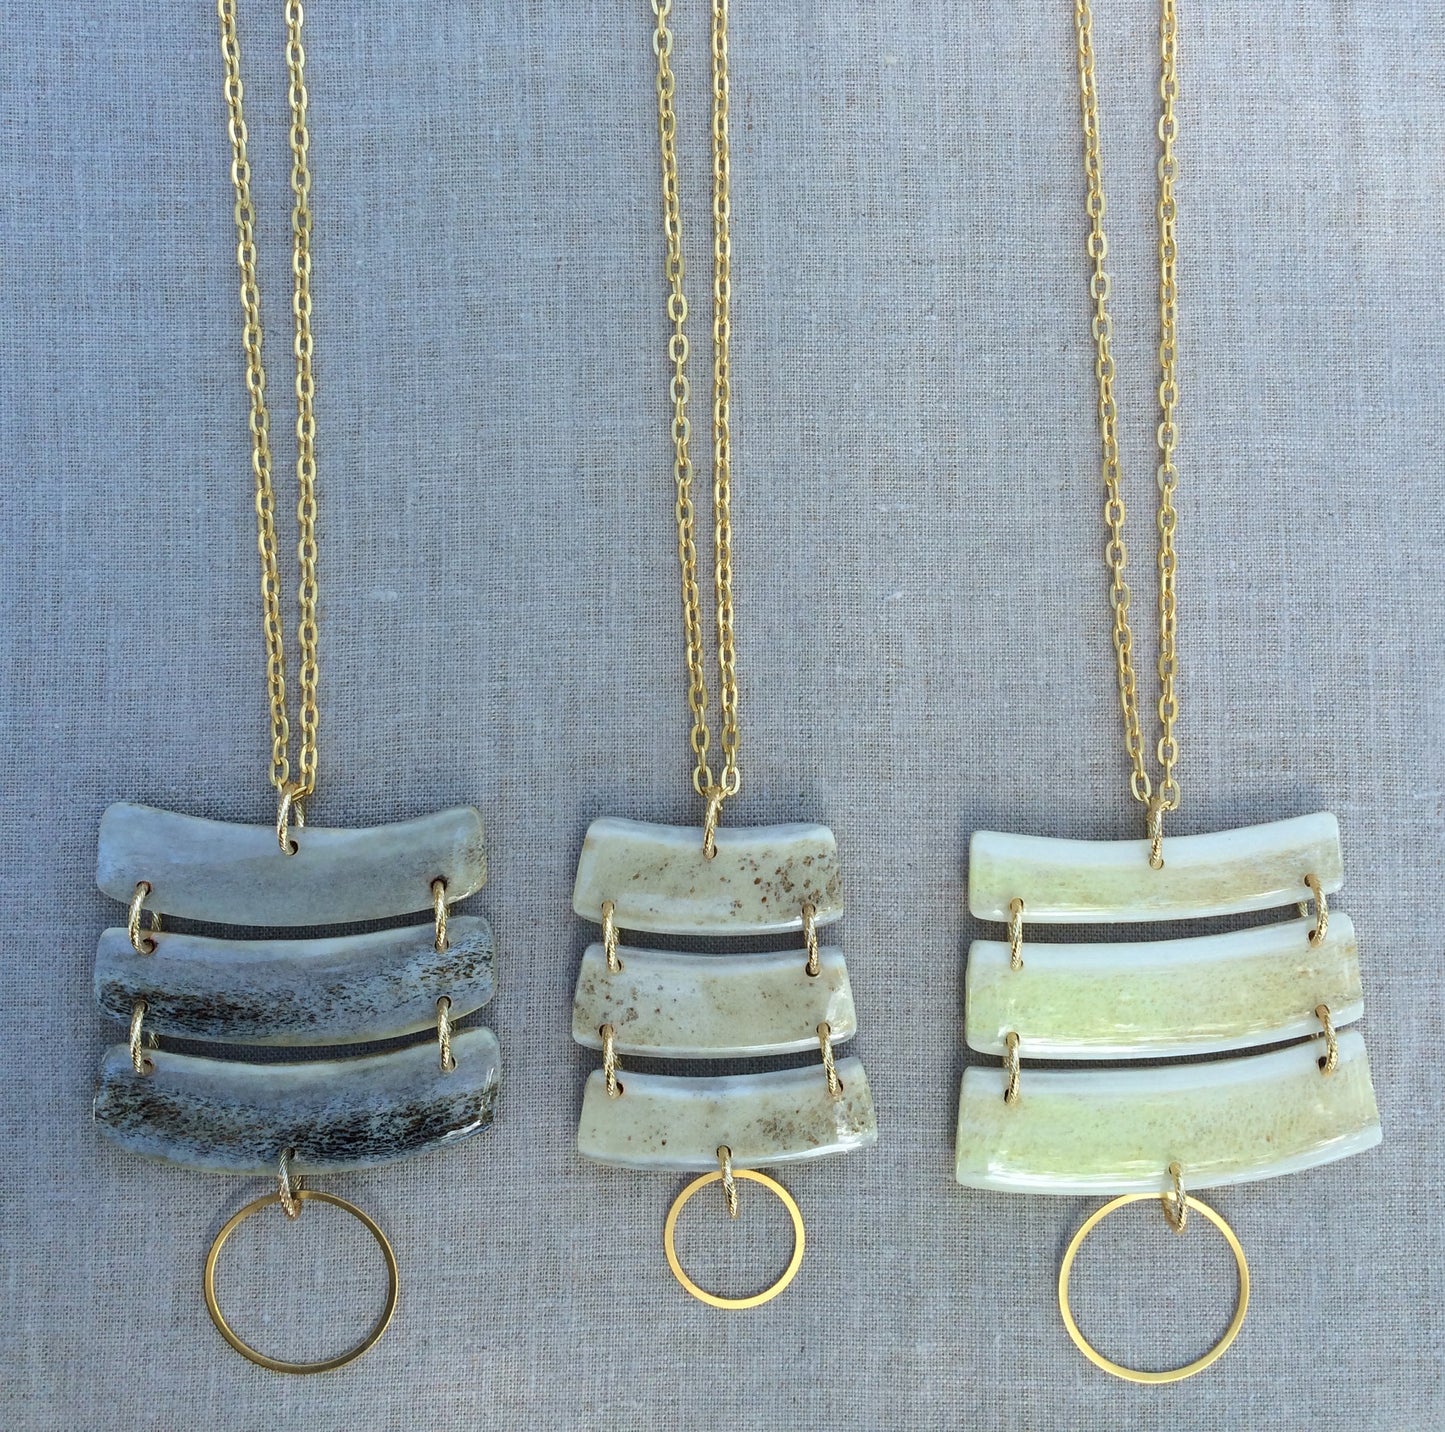 Muley Slice Necklace with Gold Circle